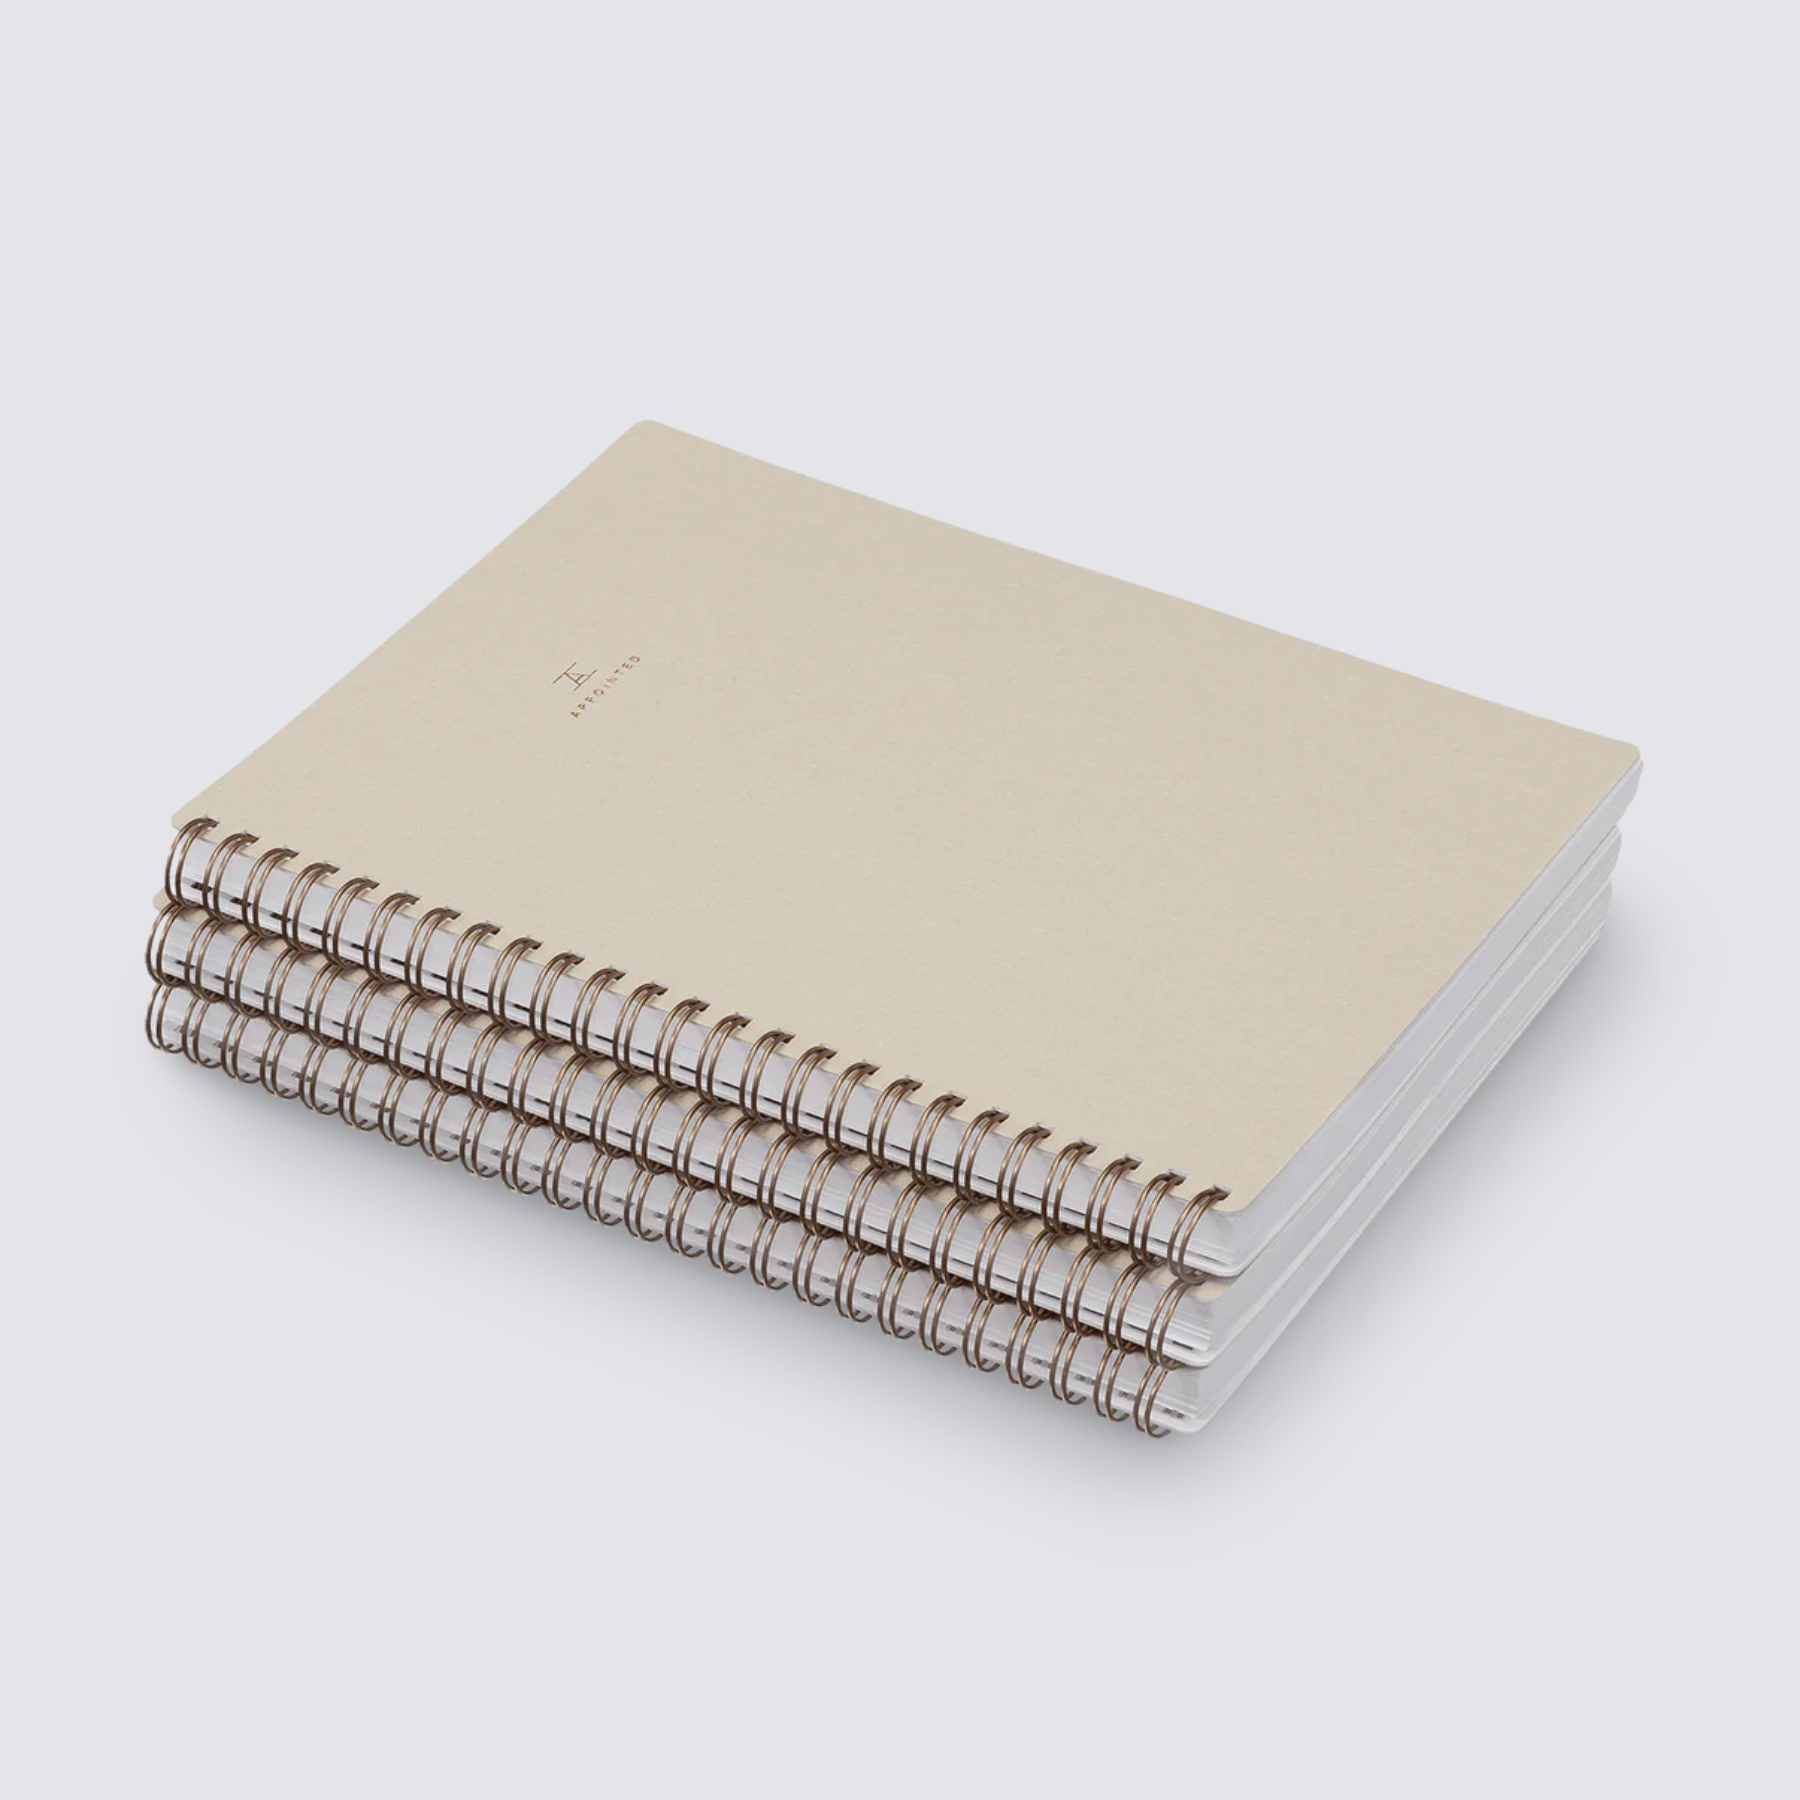 Appointed Notebooks